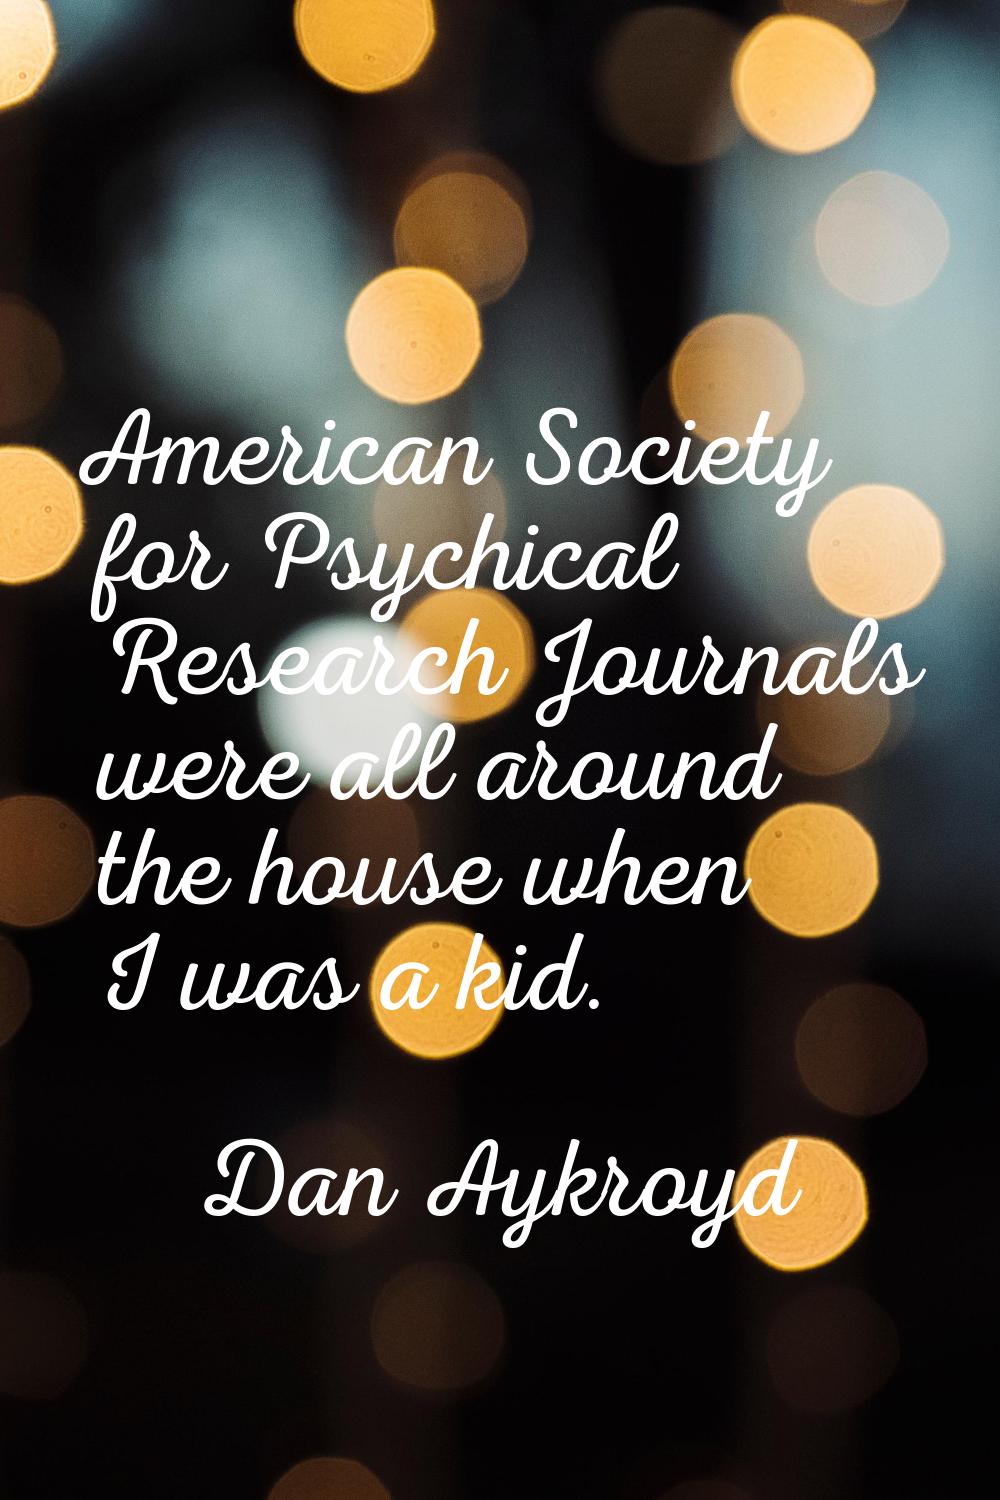 American Society for Psychical Research Journals were all around the house when I was a kid.